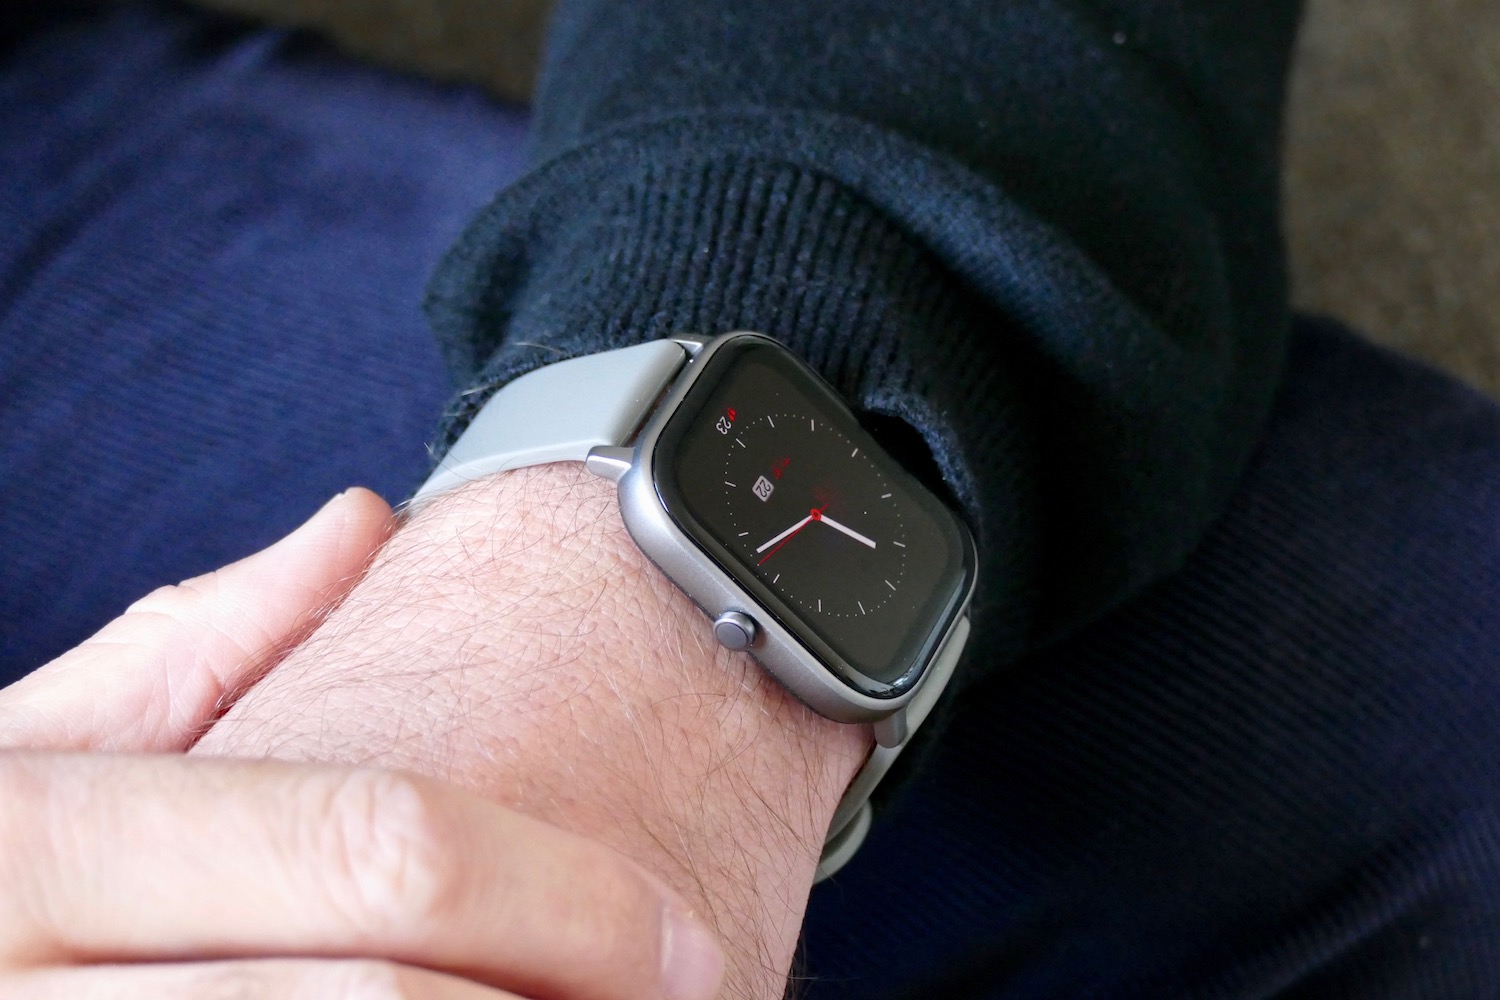 The Amazfit GTS 2 Mini May Be One Of The Cheapest Apple Watch Alternatives